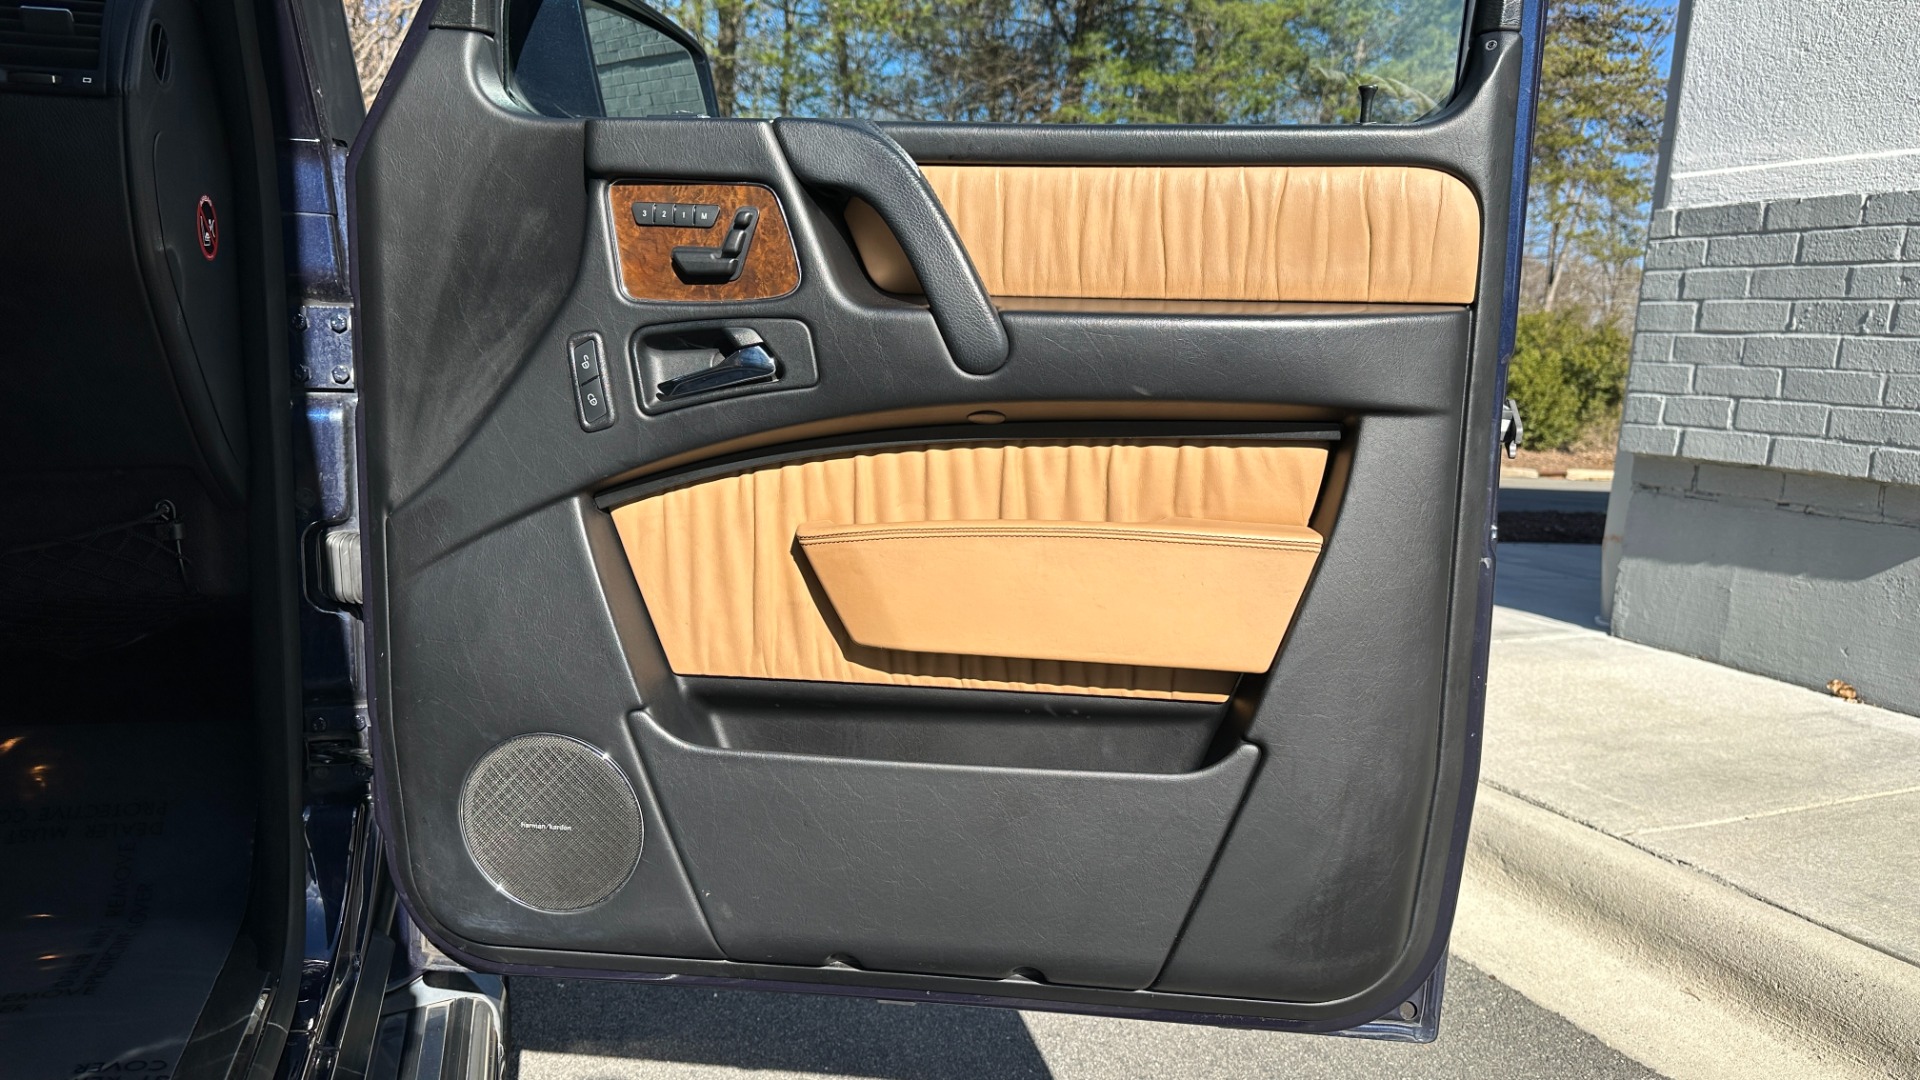 Used 2015 Mercedes-Benz G-Class G550 / DESIGNO NAPPA LEATHER / DESIGNO HEADLINER / HEATED STEERING / NAV /  for sale Sold at Formula Imports in Charlotte NC 28227 27